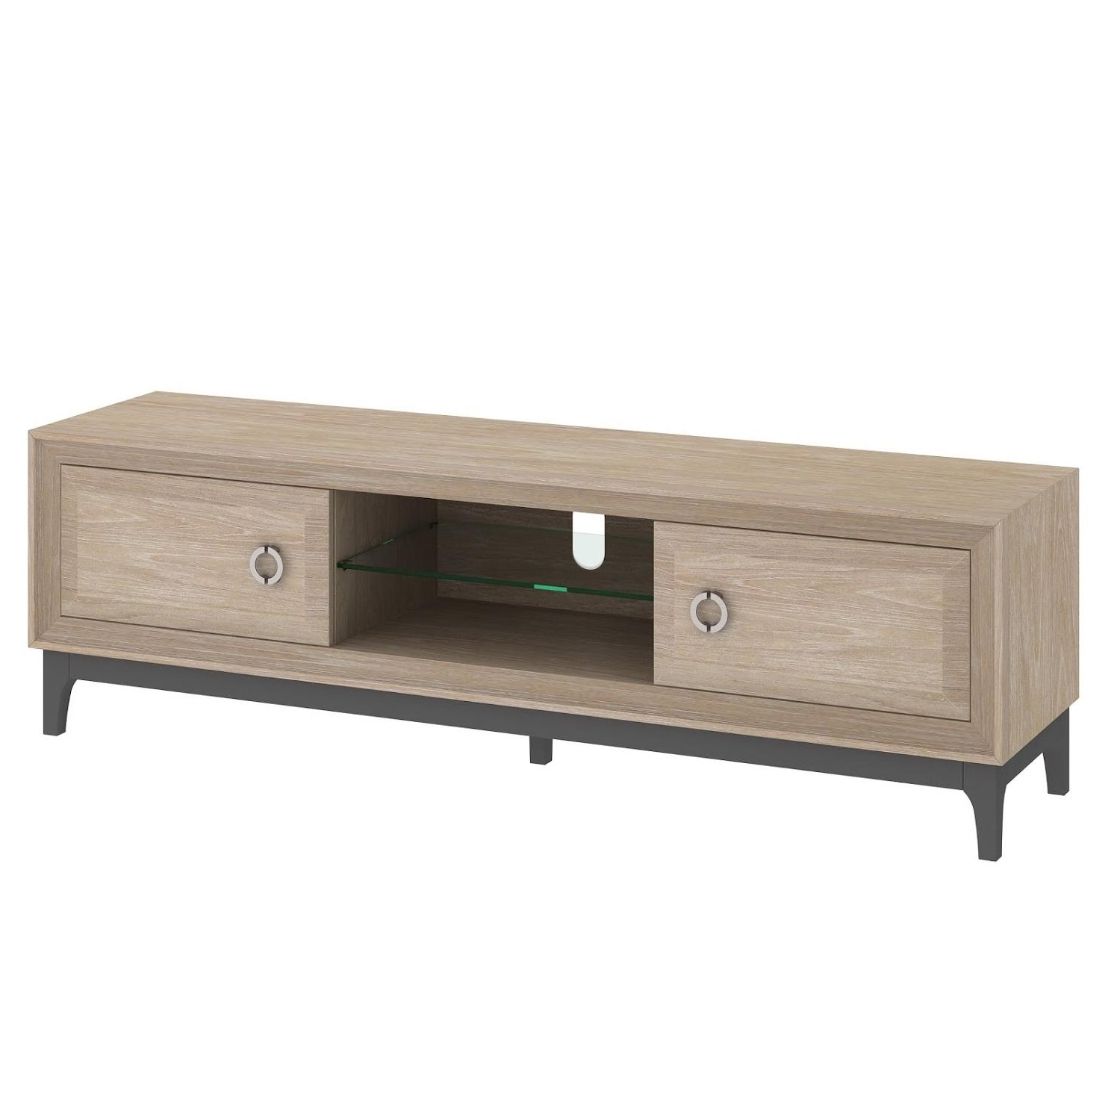 Tv Stand Aspen 170x42,5xh52cm, Body: Light Oak, Legs And Frame: Dark With Most Up To Date Beech Tv Stands (View 19 of 20)